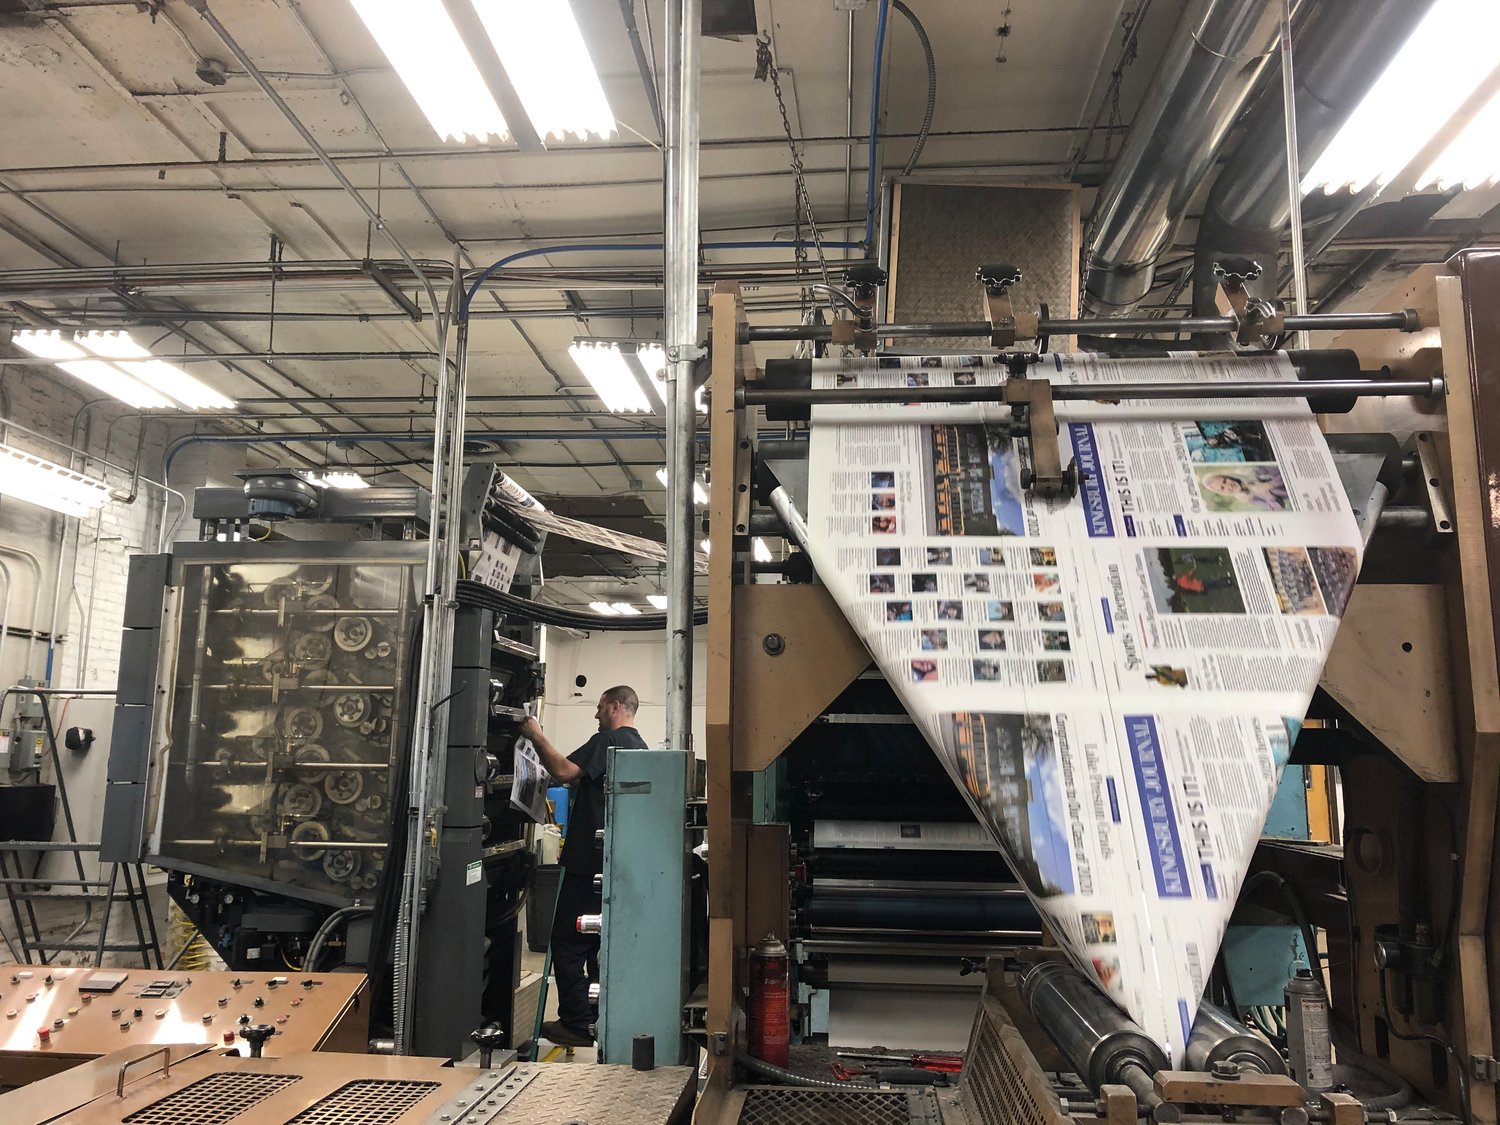 After printing, pages are folded into the correct order and then cut, resulting in a completed newspaper. The stream of paper is constant and allows thousands of papers to be produced in minutes.